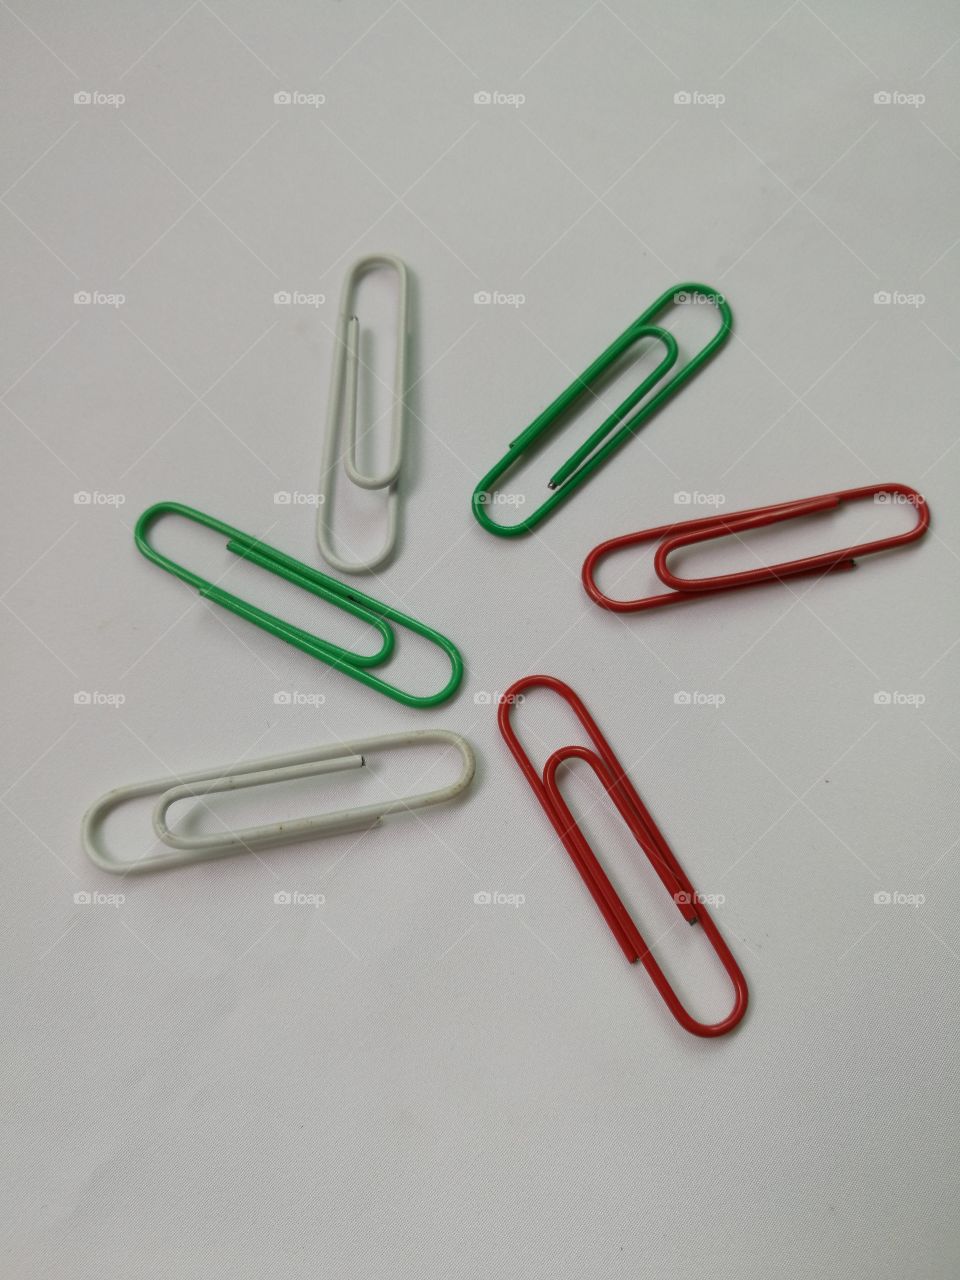 Colorful paper clips isolated on white background.